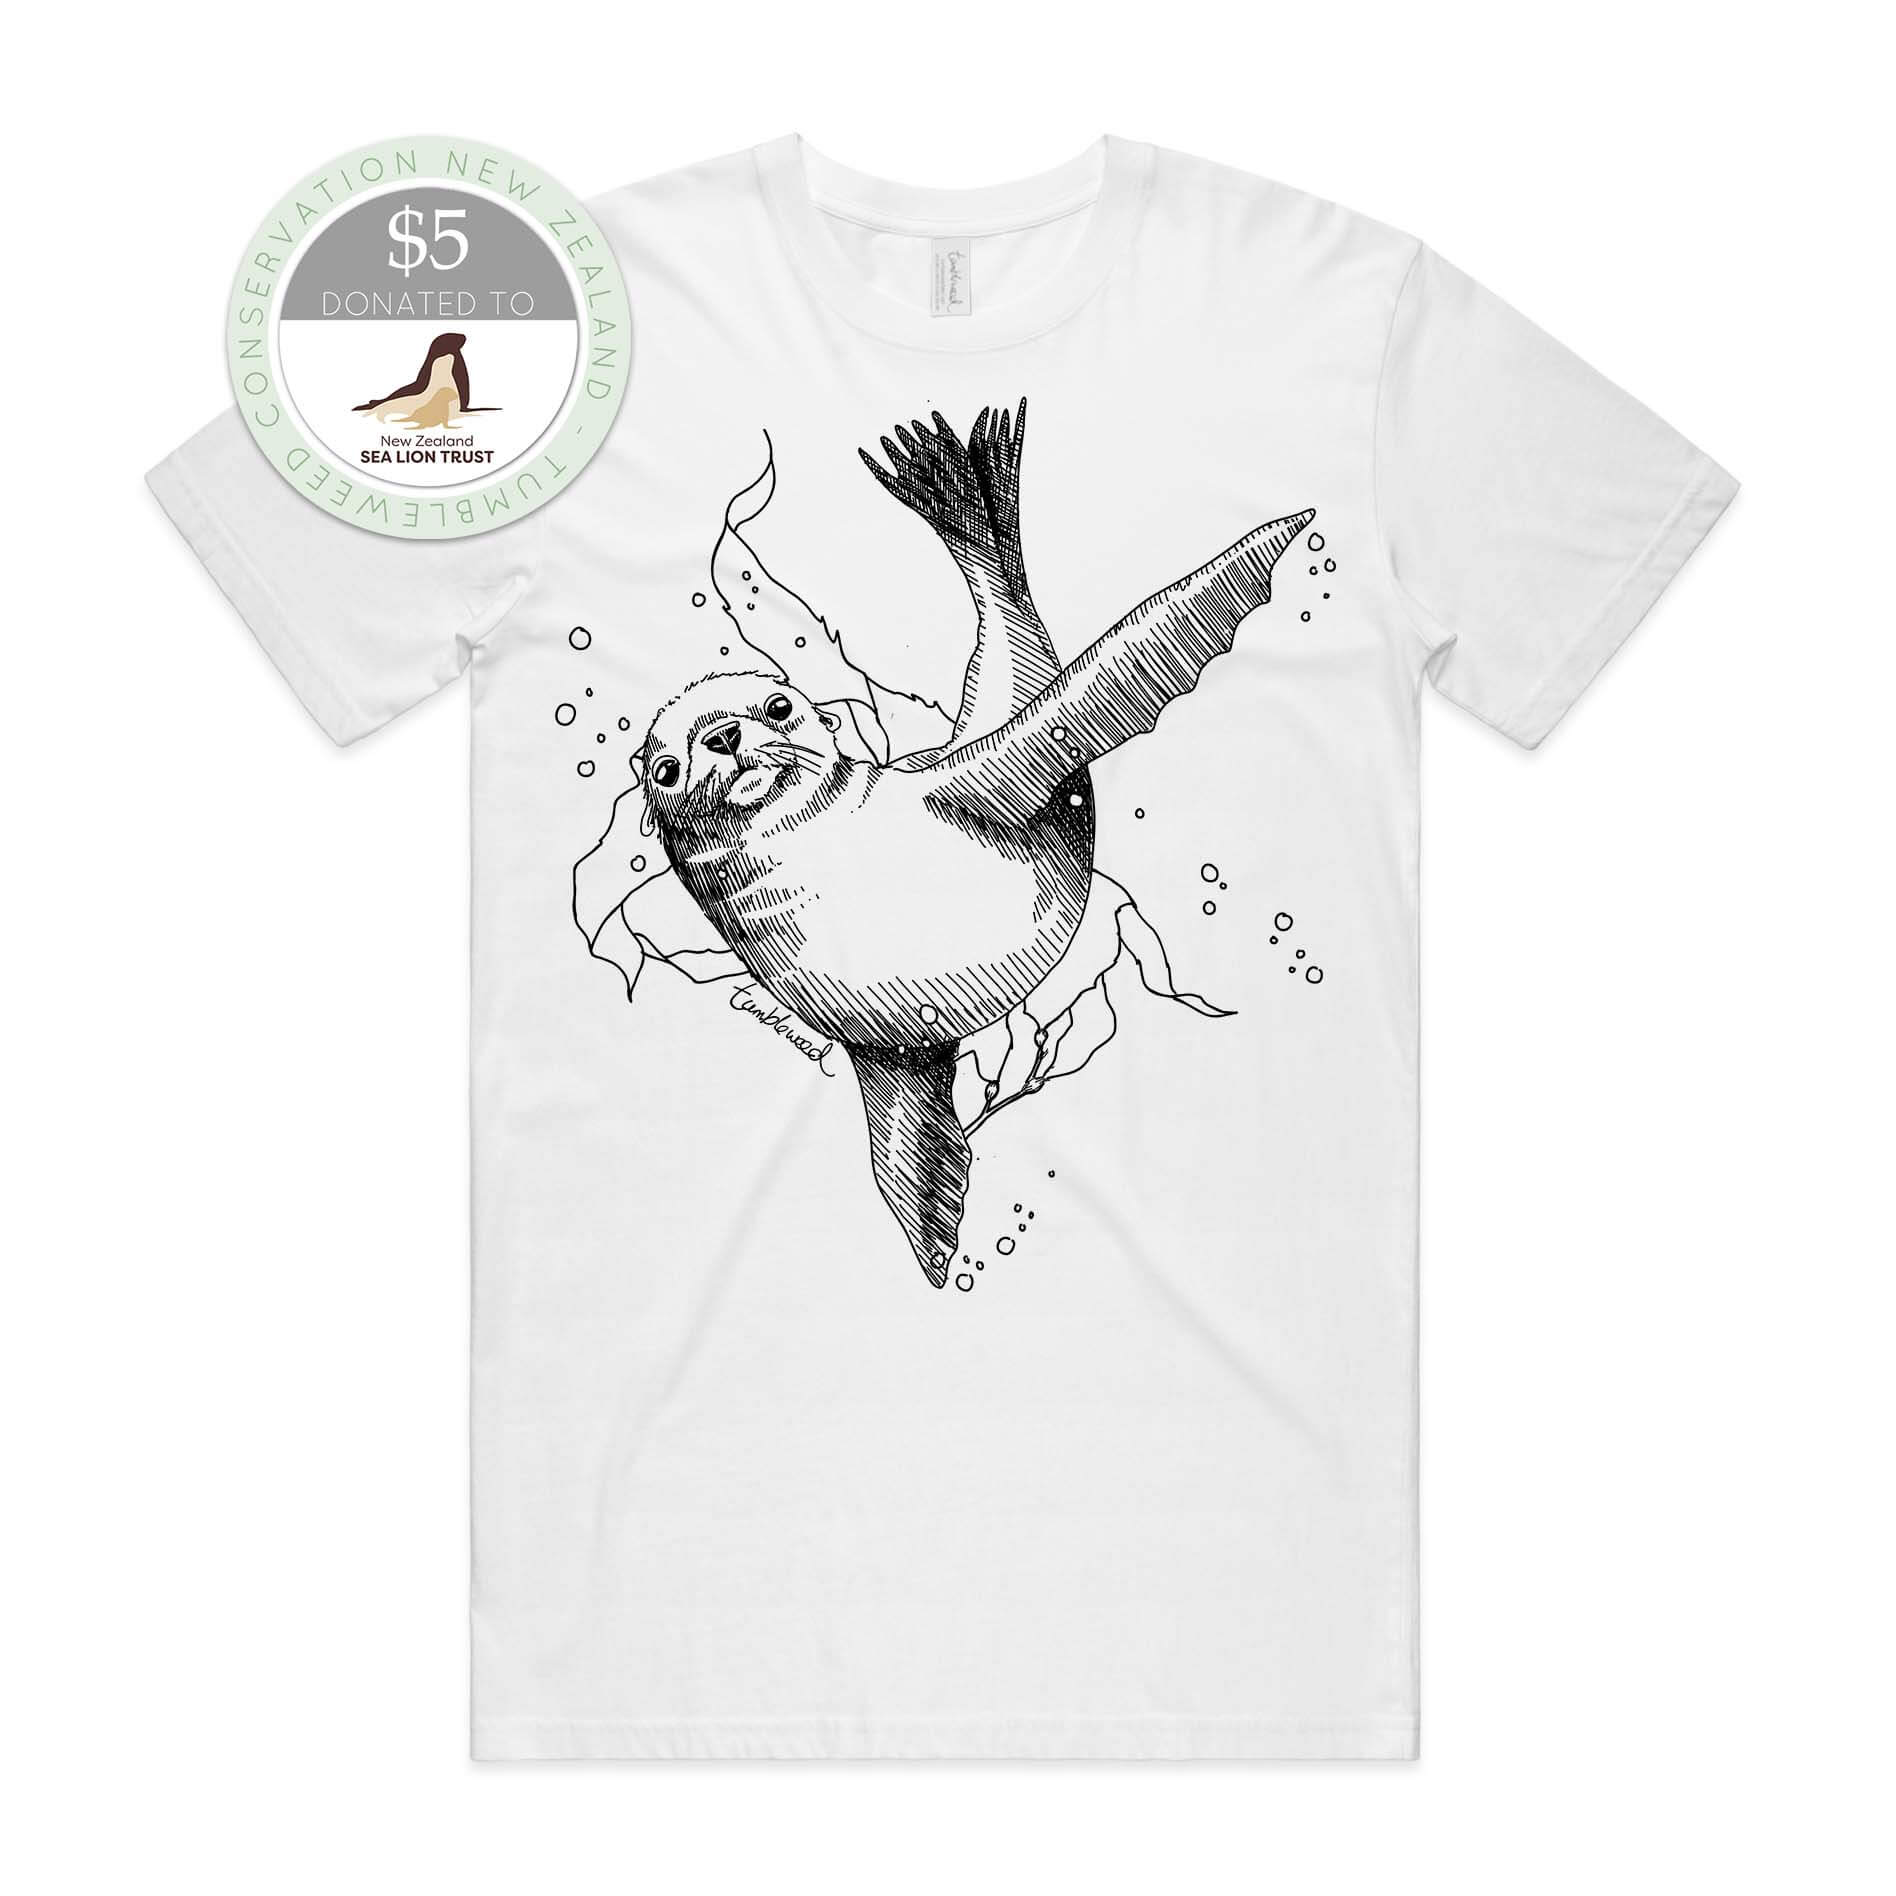 Charcoal, male t-shirt featuring a screen printed New Zealand sea lion design.